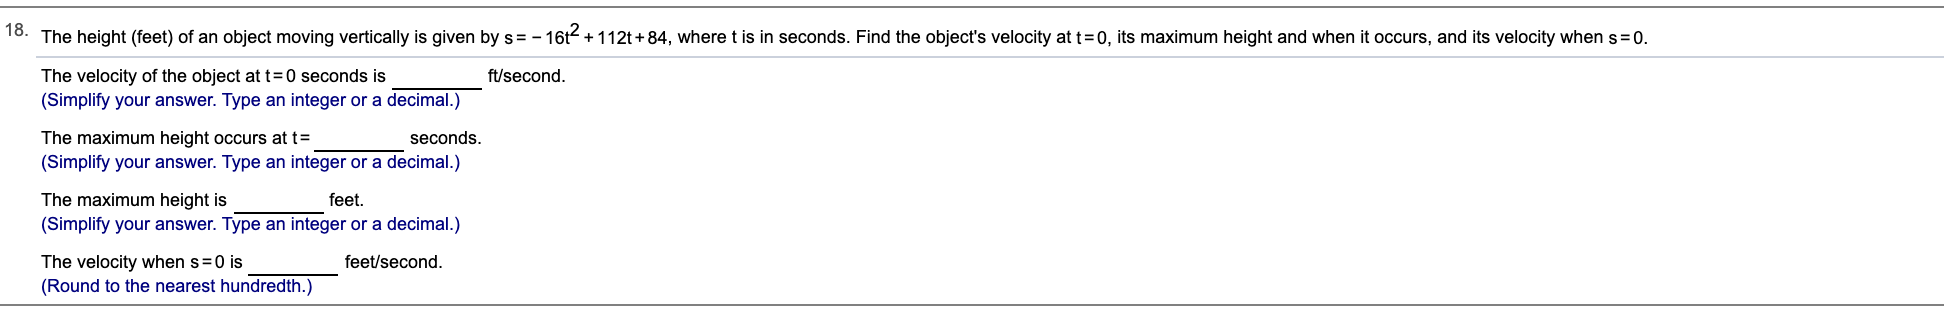 18.
The height (feet) of an object moving vertically is given by s =- 16t + 112t+84, where t is in seconds. Find the object's velocity at t=0, its maximum height and when it occurs, and its velocity when s=0.
The velocity of the object at t=0 seconds is
(Simplify your answer. Type an integer or a decimal.)
The maximum height occurs at t=
(Simplify your answer. Type an integer or a decimal.)
The maximum height is
(Simplify your answer. Type an integer or a decimal.)
ft/second.
seconds.
feet.
feet/second.
The velocity when s=0 is
(Round to the nearest hundredth.)
